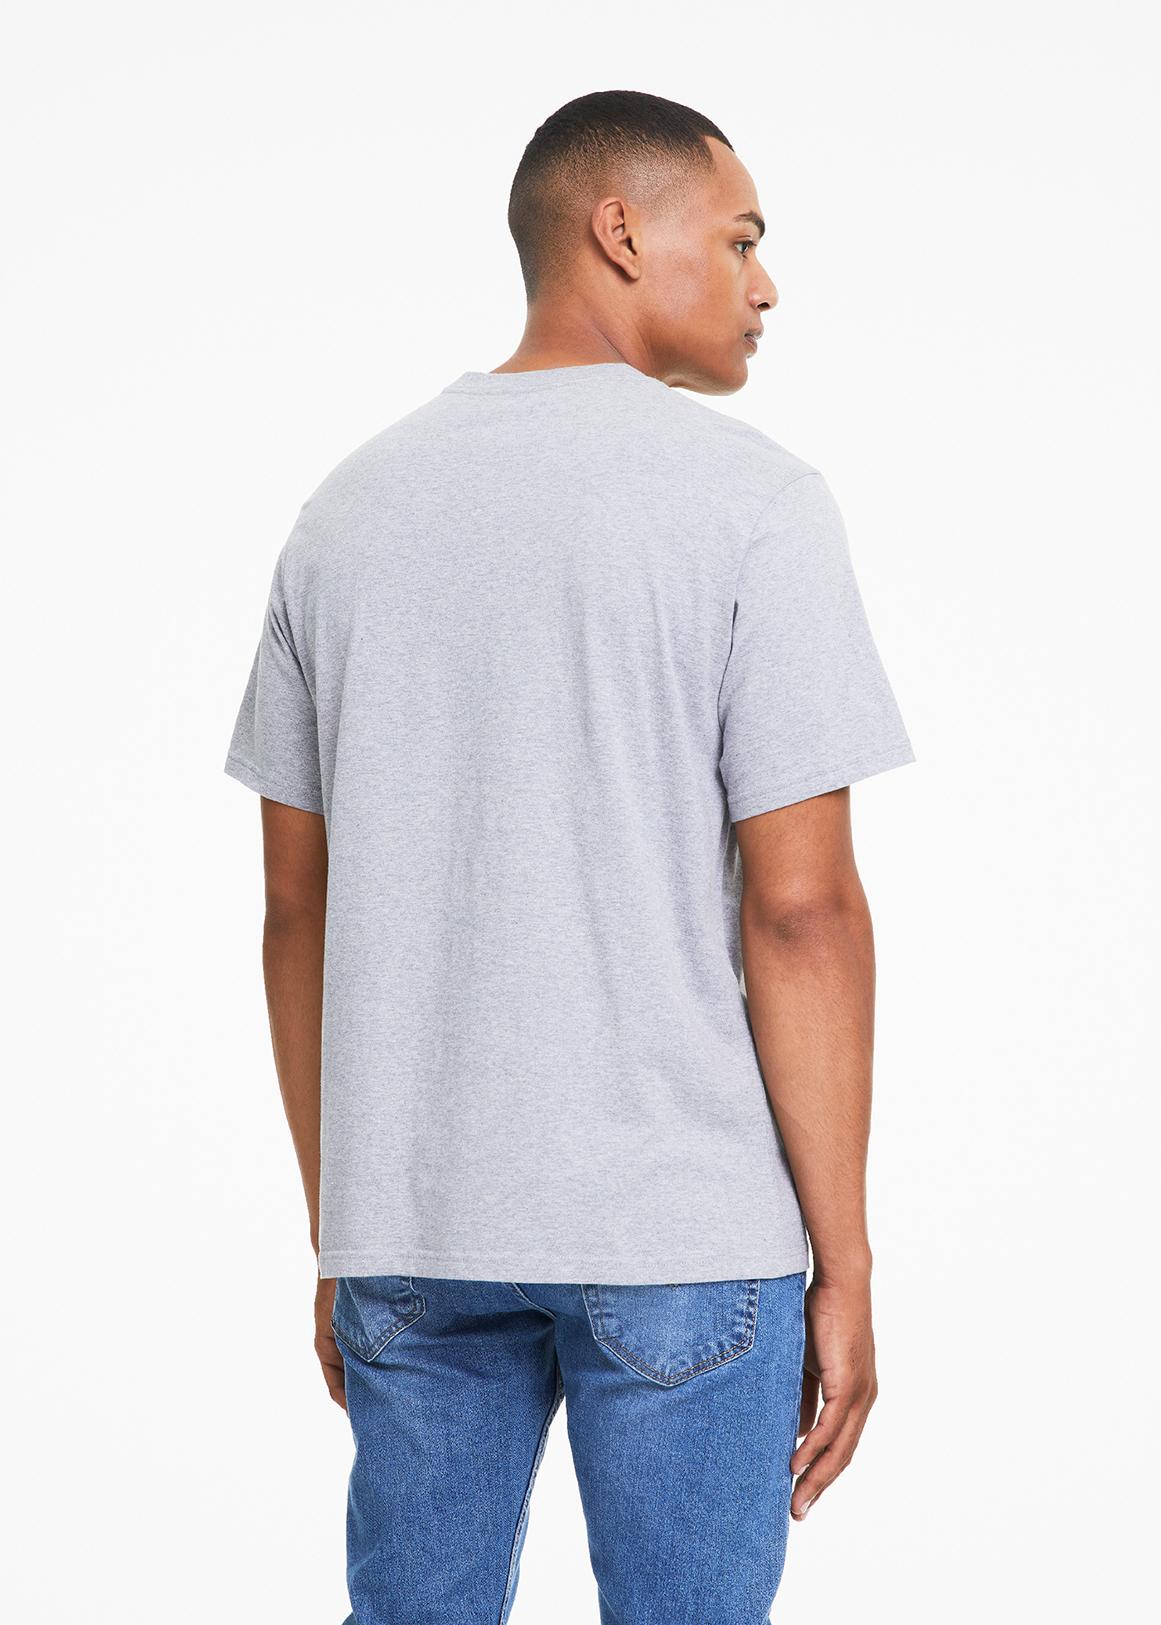 Relaxed Fit Short Sleeve Graphic T-shirt - Grey